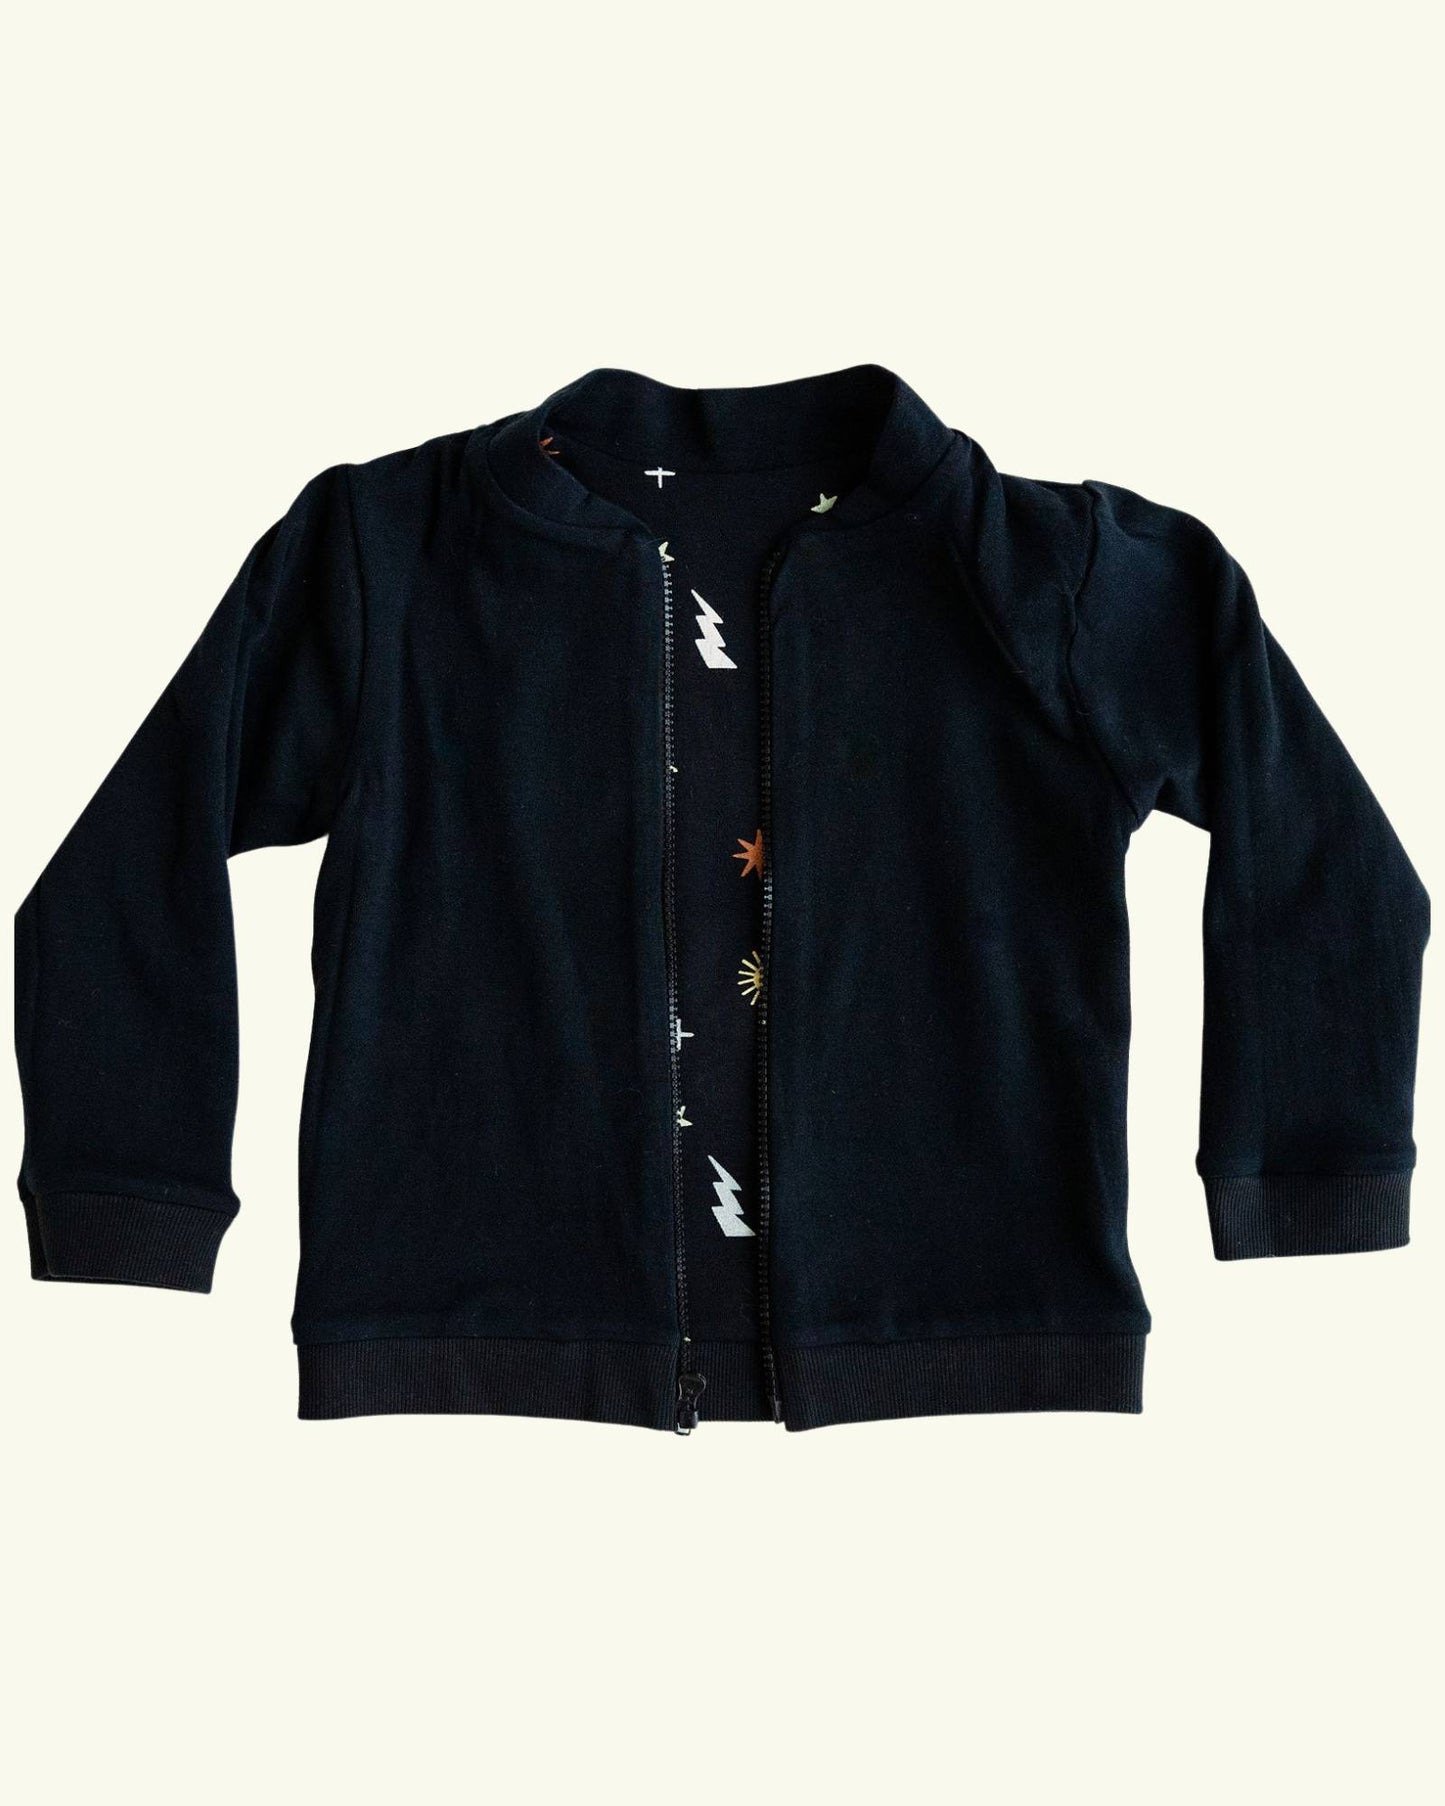 Reversible Jacket- Outer Space/Black